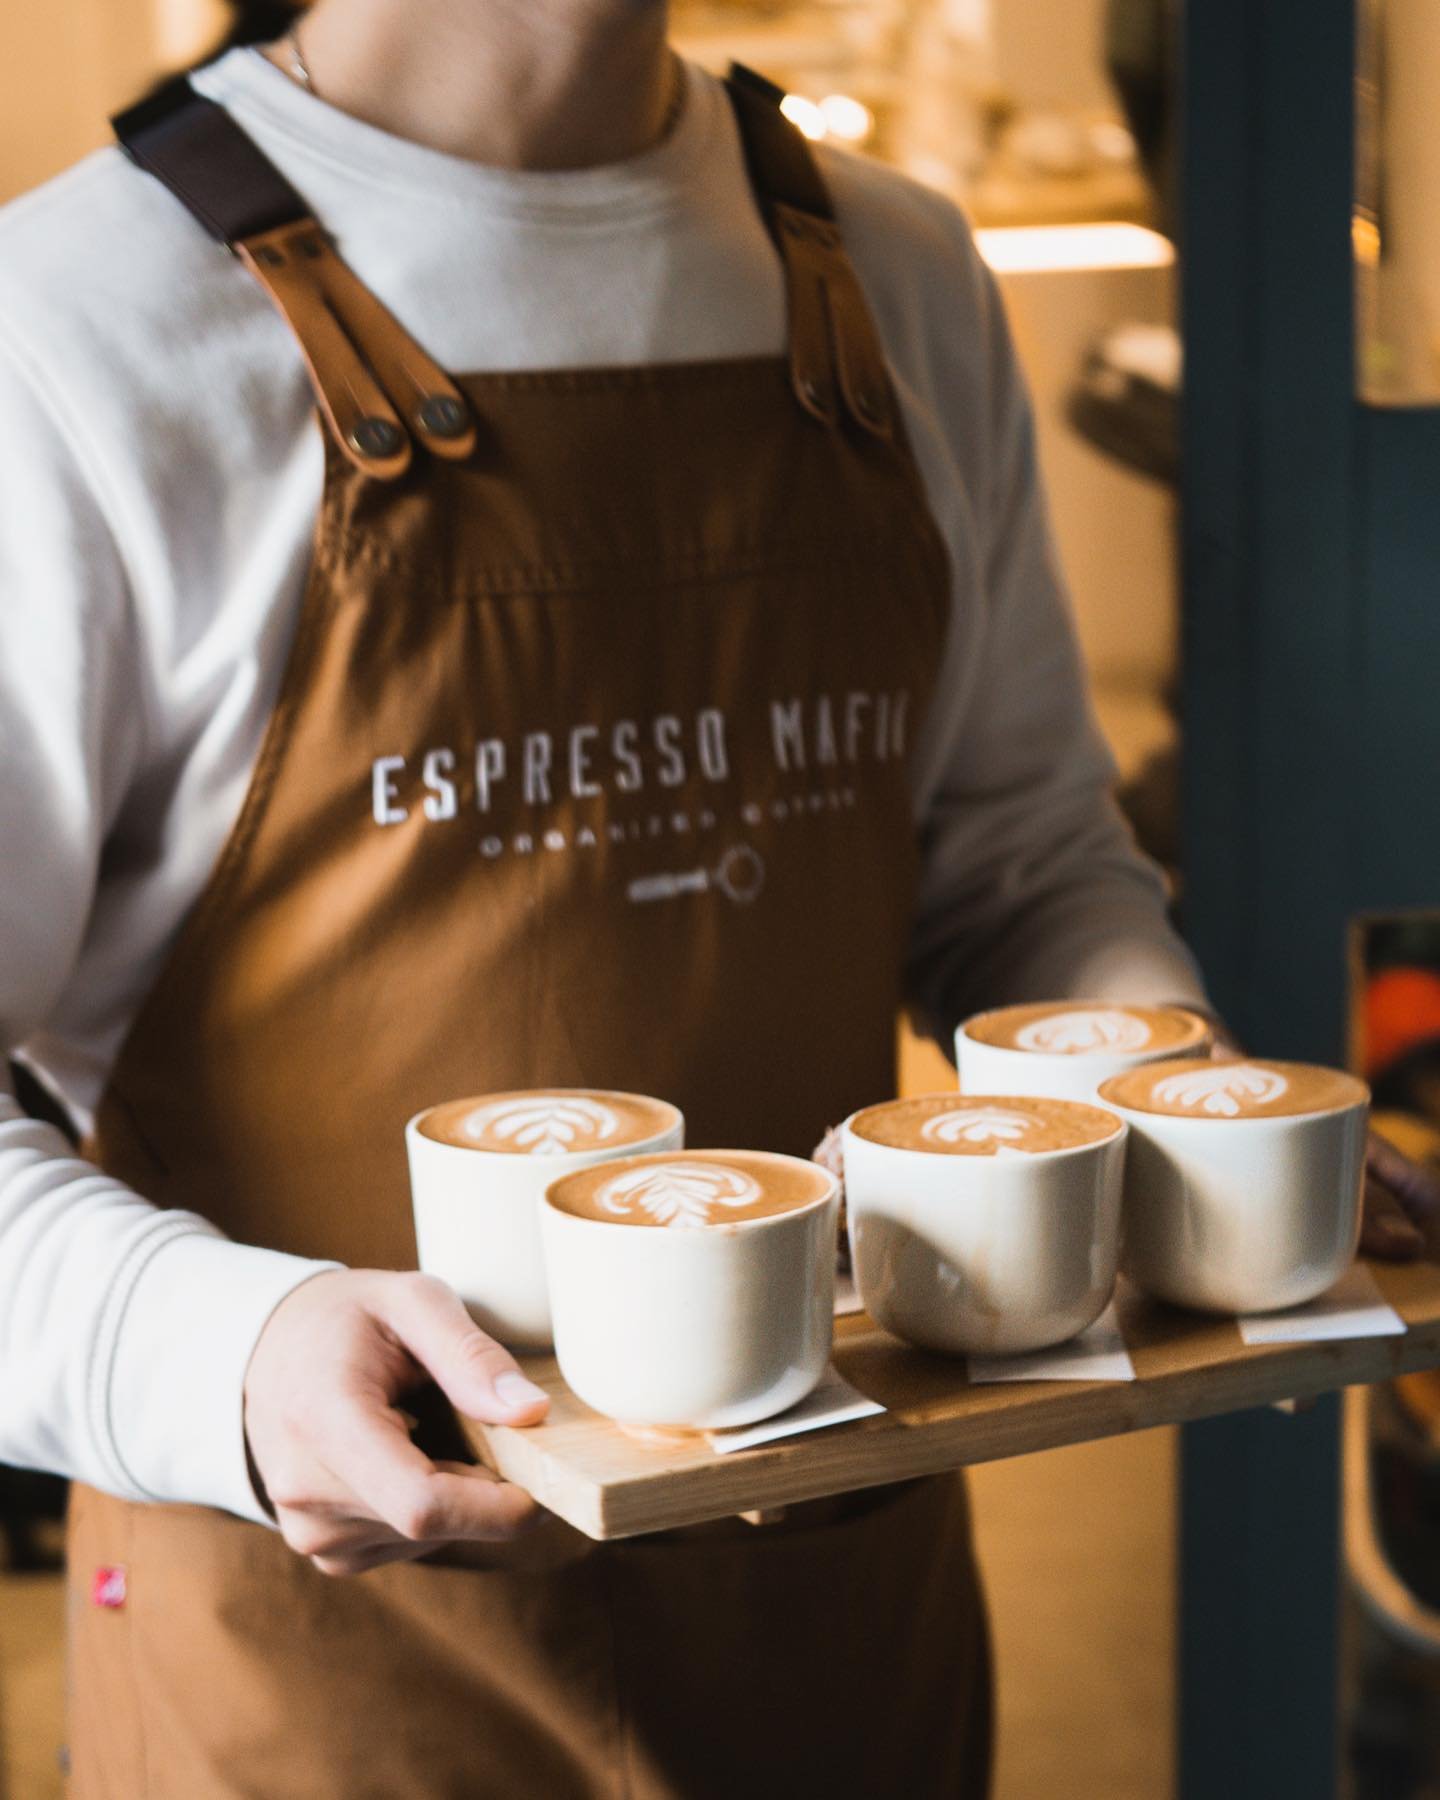 This is what we want to see coming our way&hellip; a tray full of coffee! 

All double shot, all ready to get you on track this Thursday.
.
.
.

.

#espresso #espressomafia #espressomafiagirona #cyclecafe #girona #coffee #cafe #coolcafe #caffeineaddi